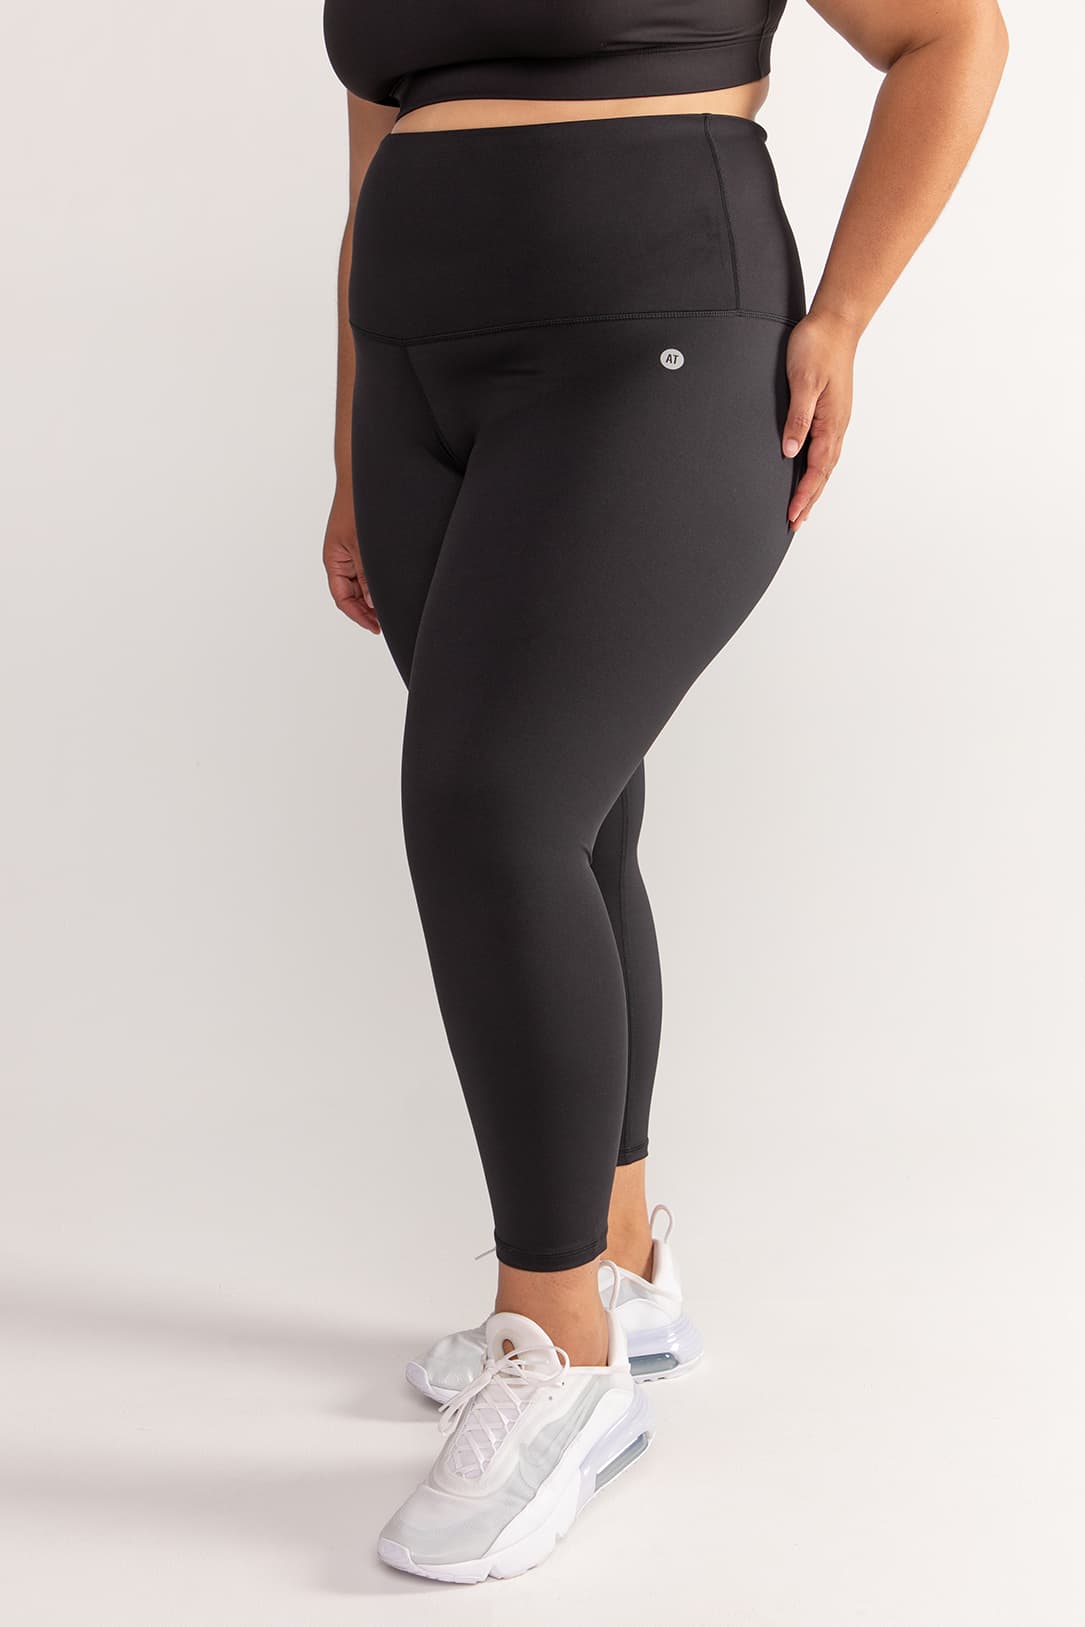 ultra-high-waisted-gym-tights-black-plussize2-front